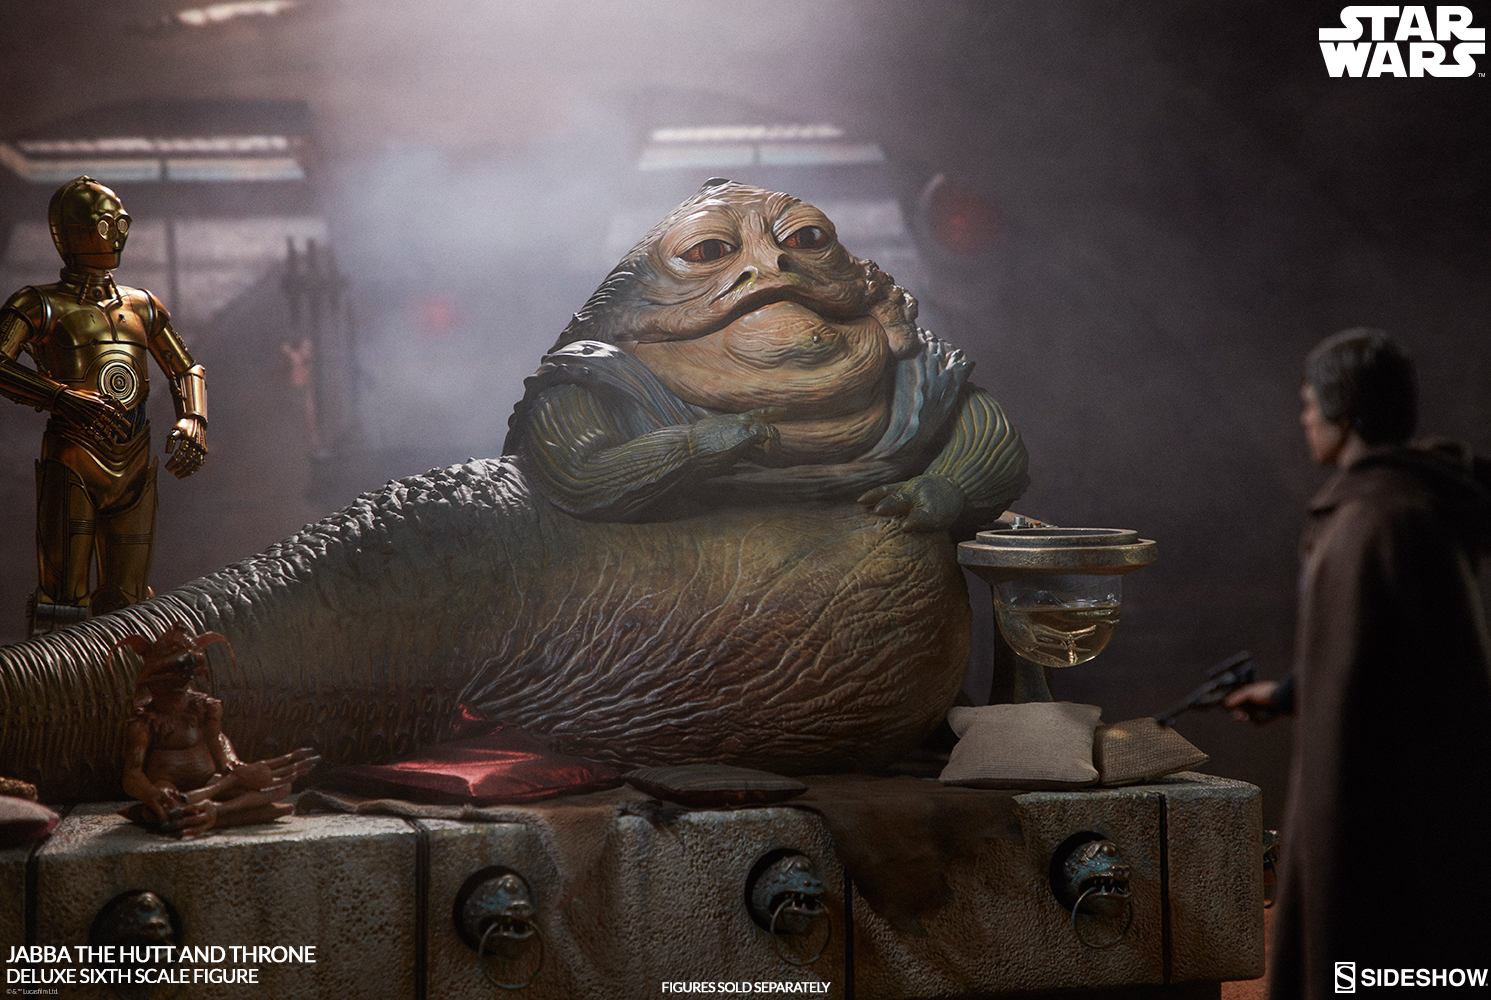 star-wars-jabba-the-hutt-and-throne-deluxe-sixth-scale-figure-sideshow-100410-33